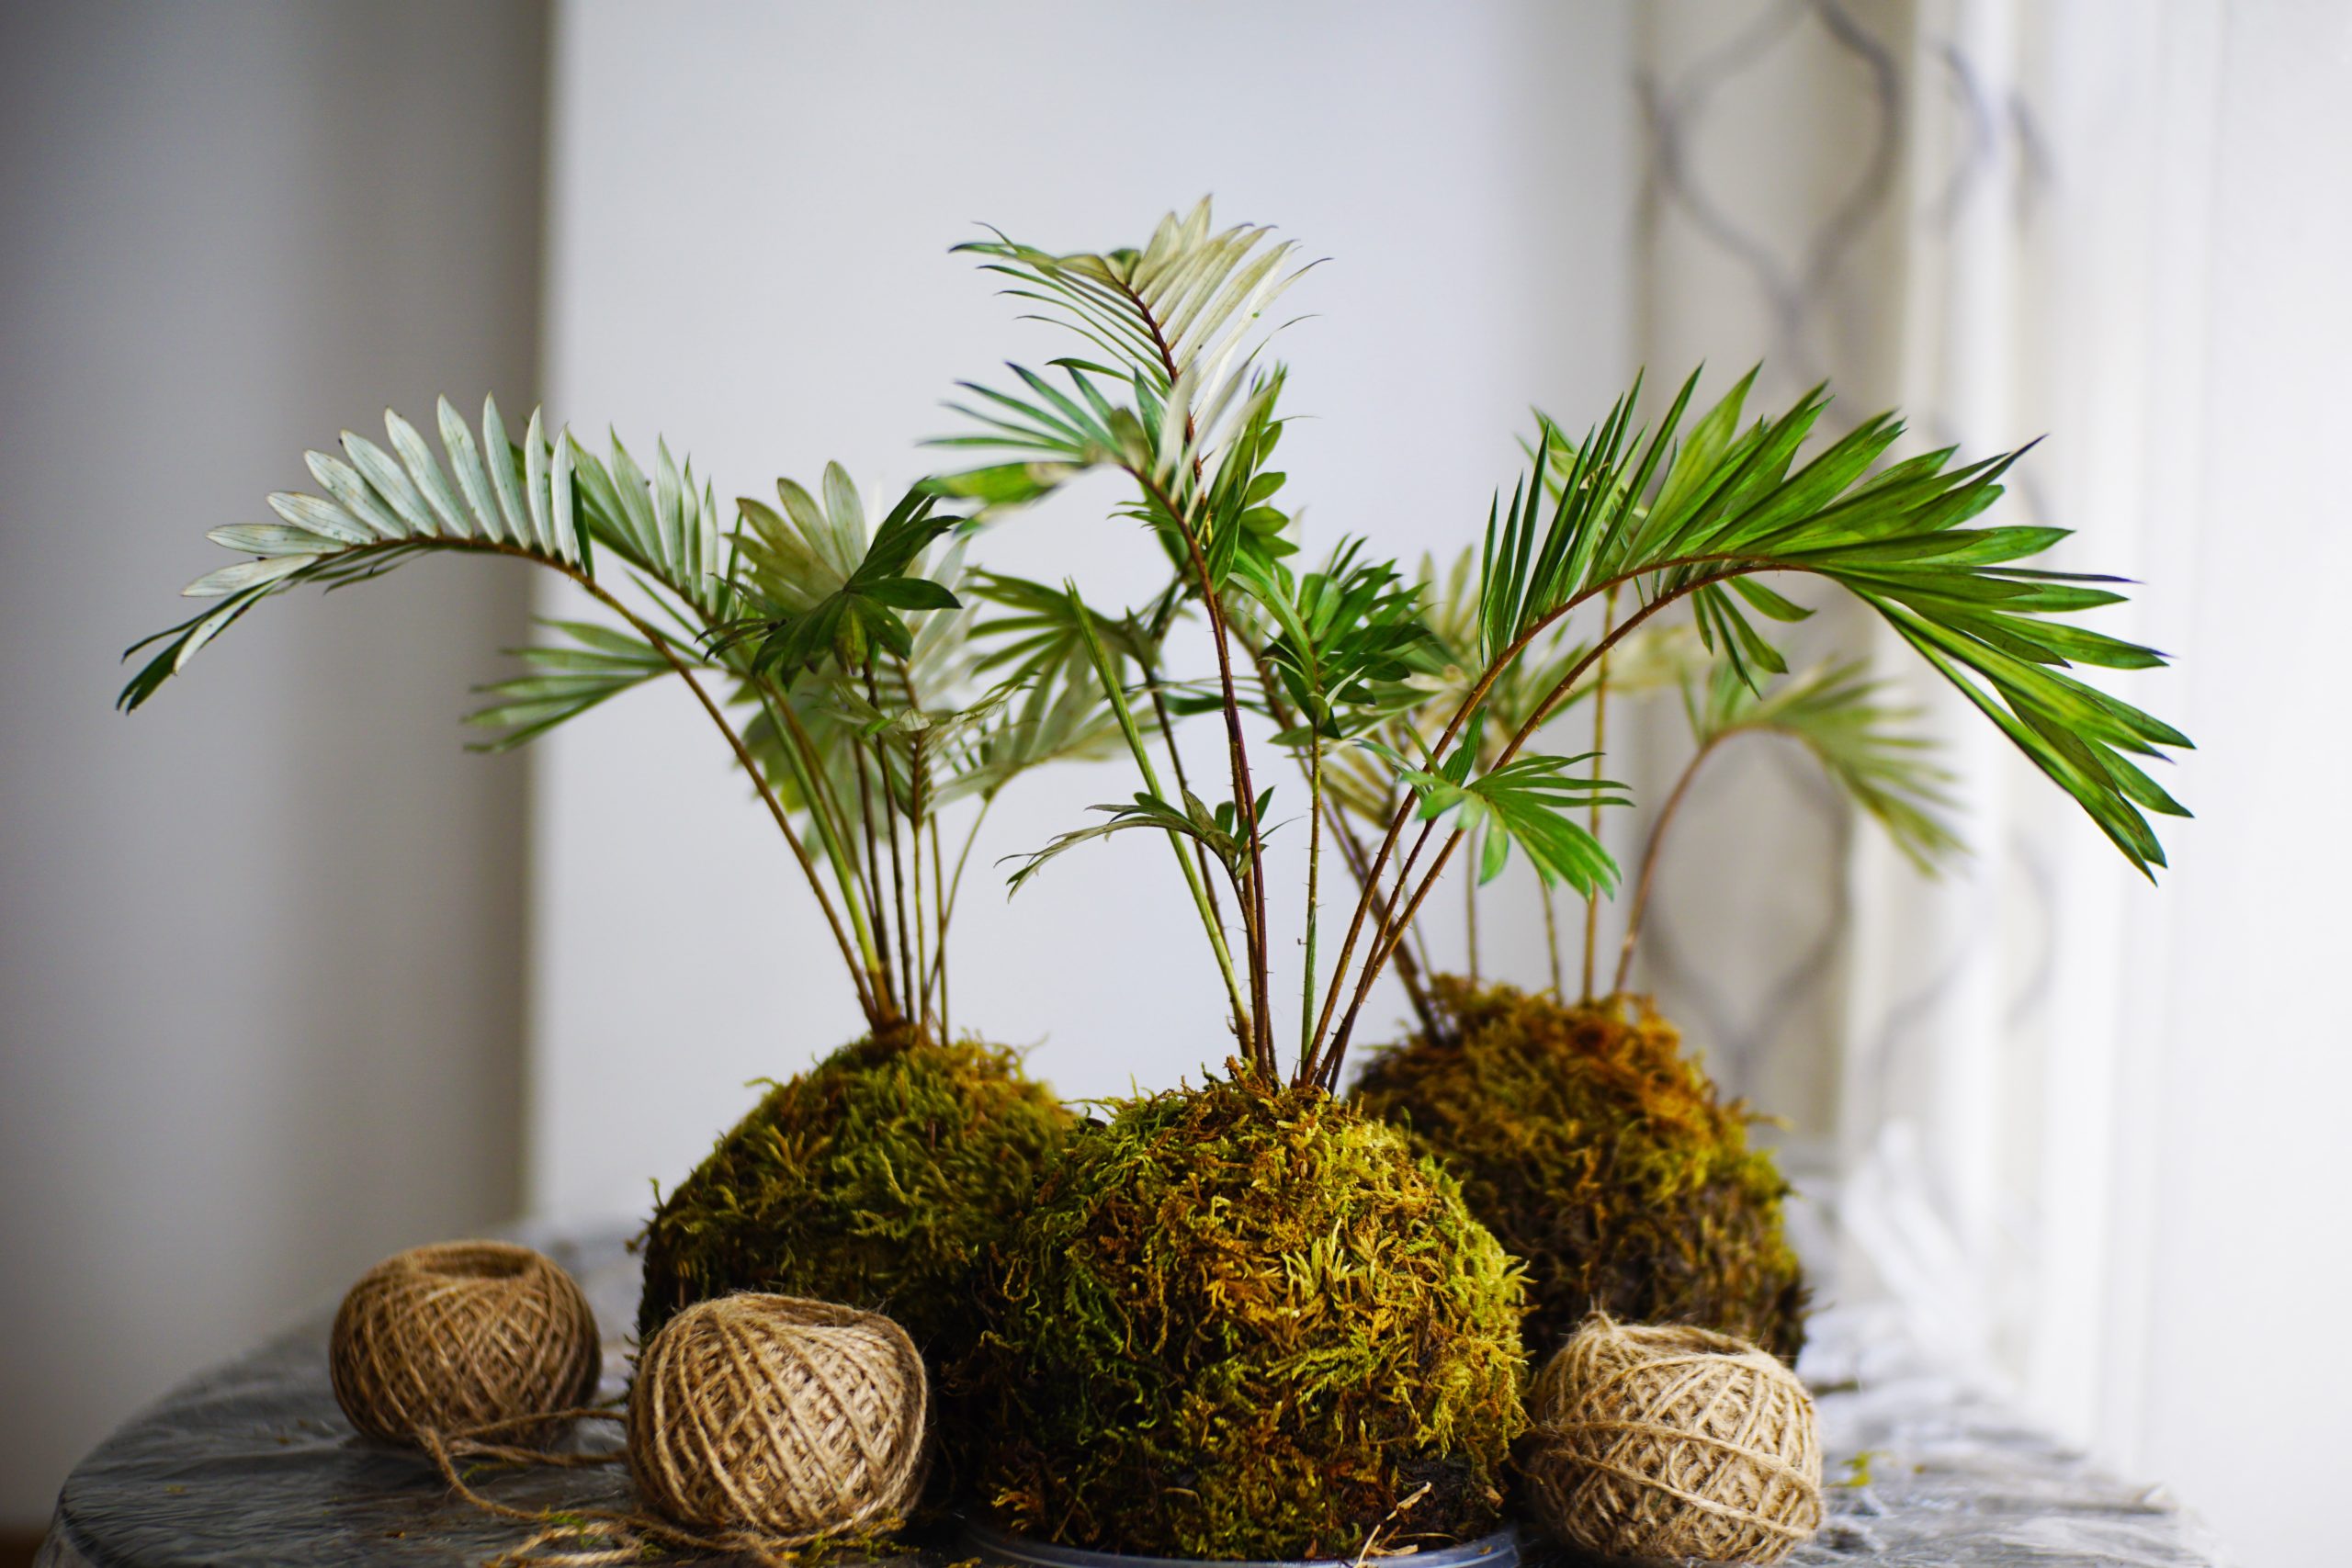 Create Traditional Japanese Kokedama to Explore the Concept of